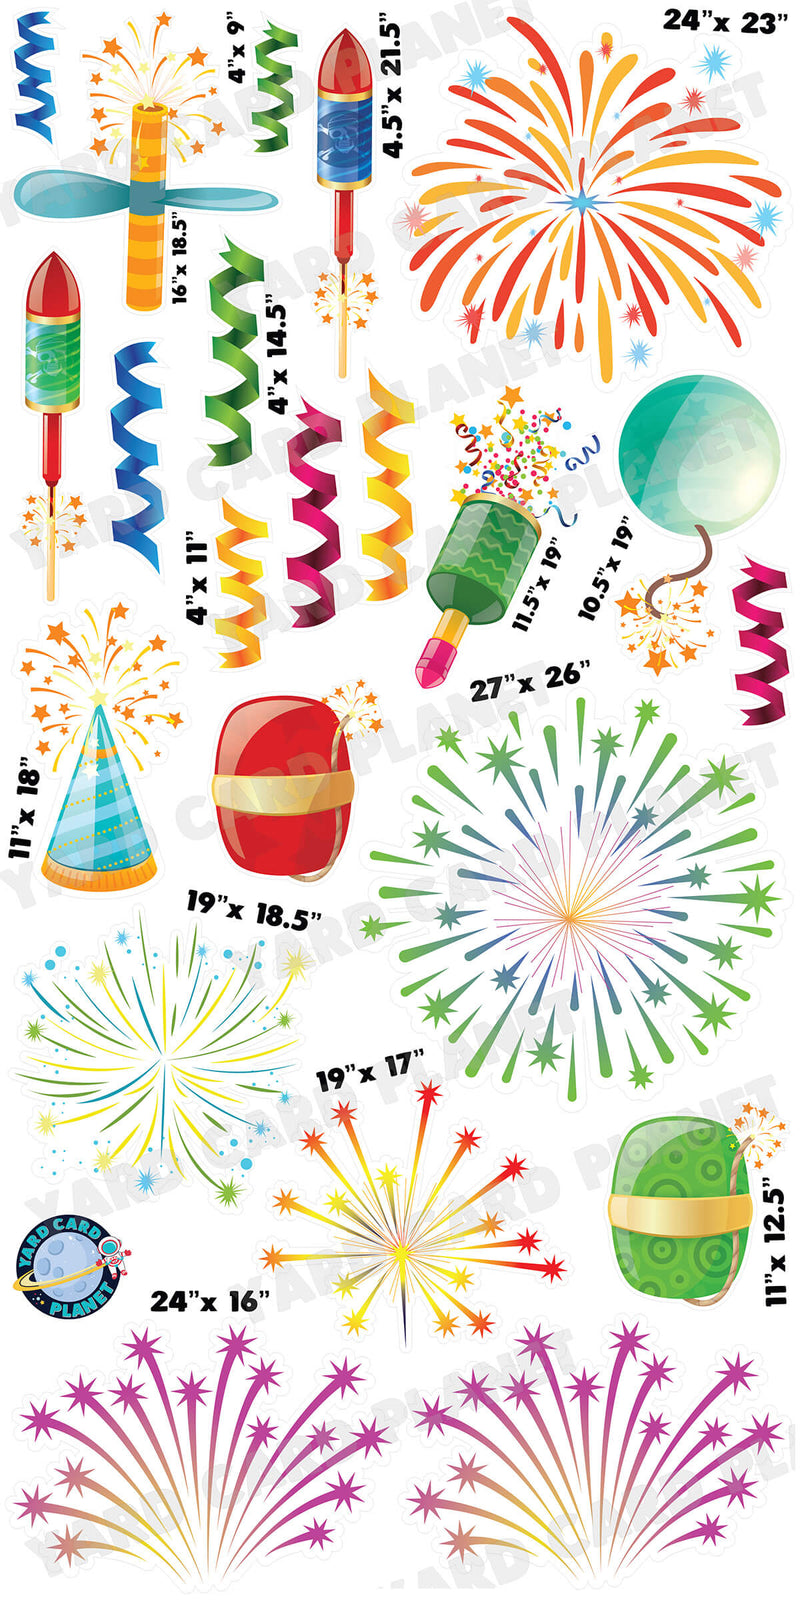 Fireworks and Streamers Yard Card Flair Set with Measurements